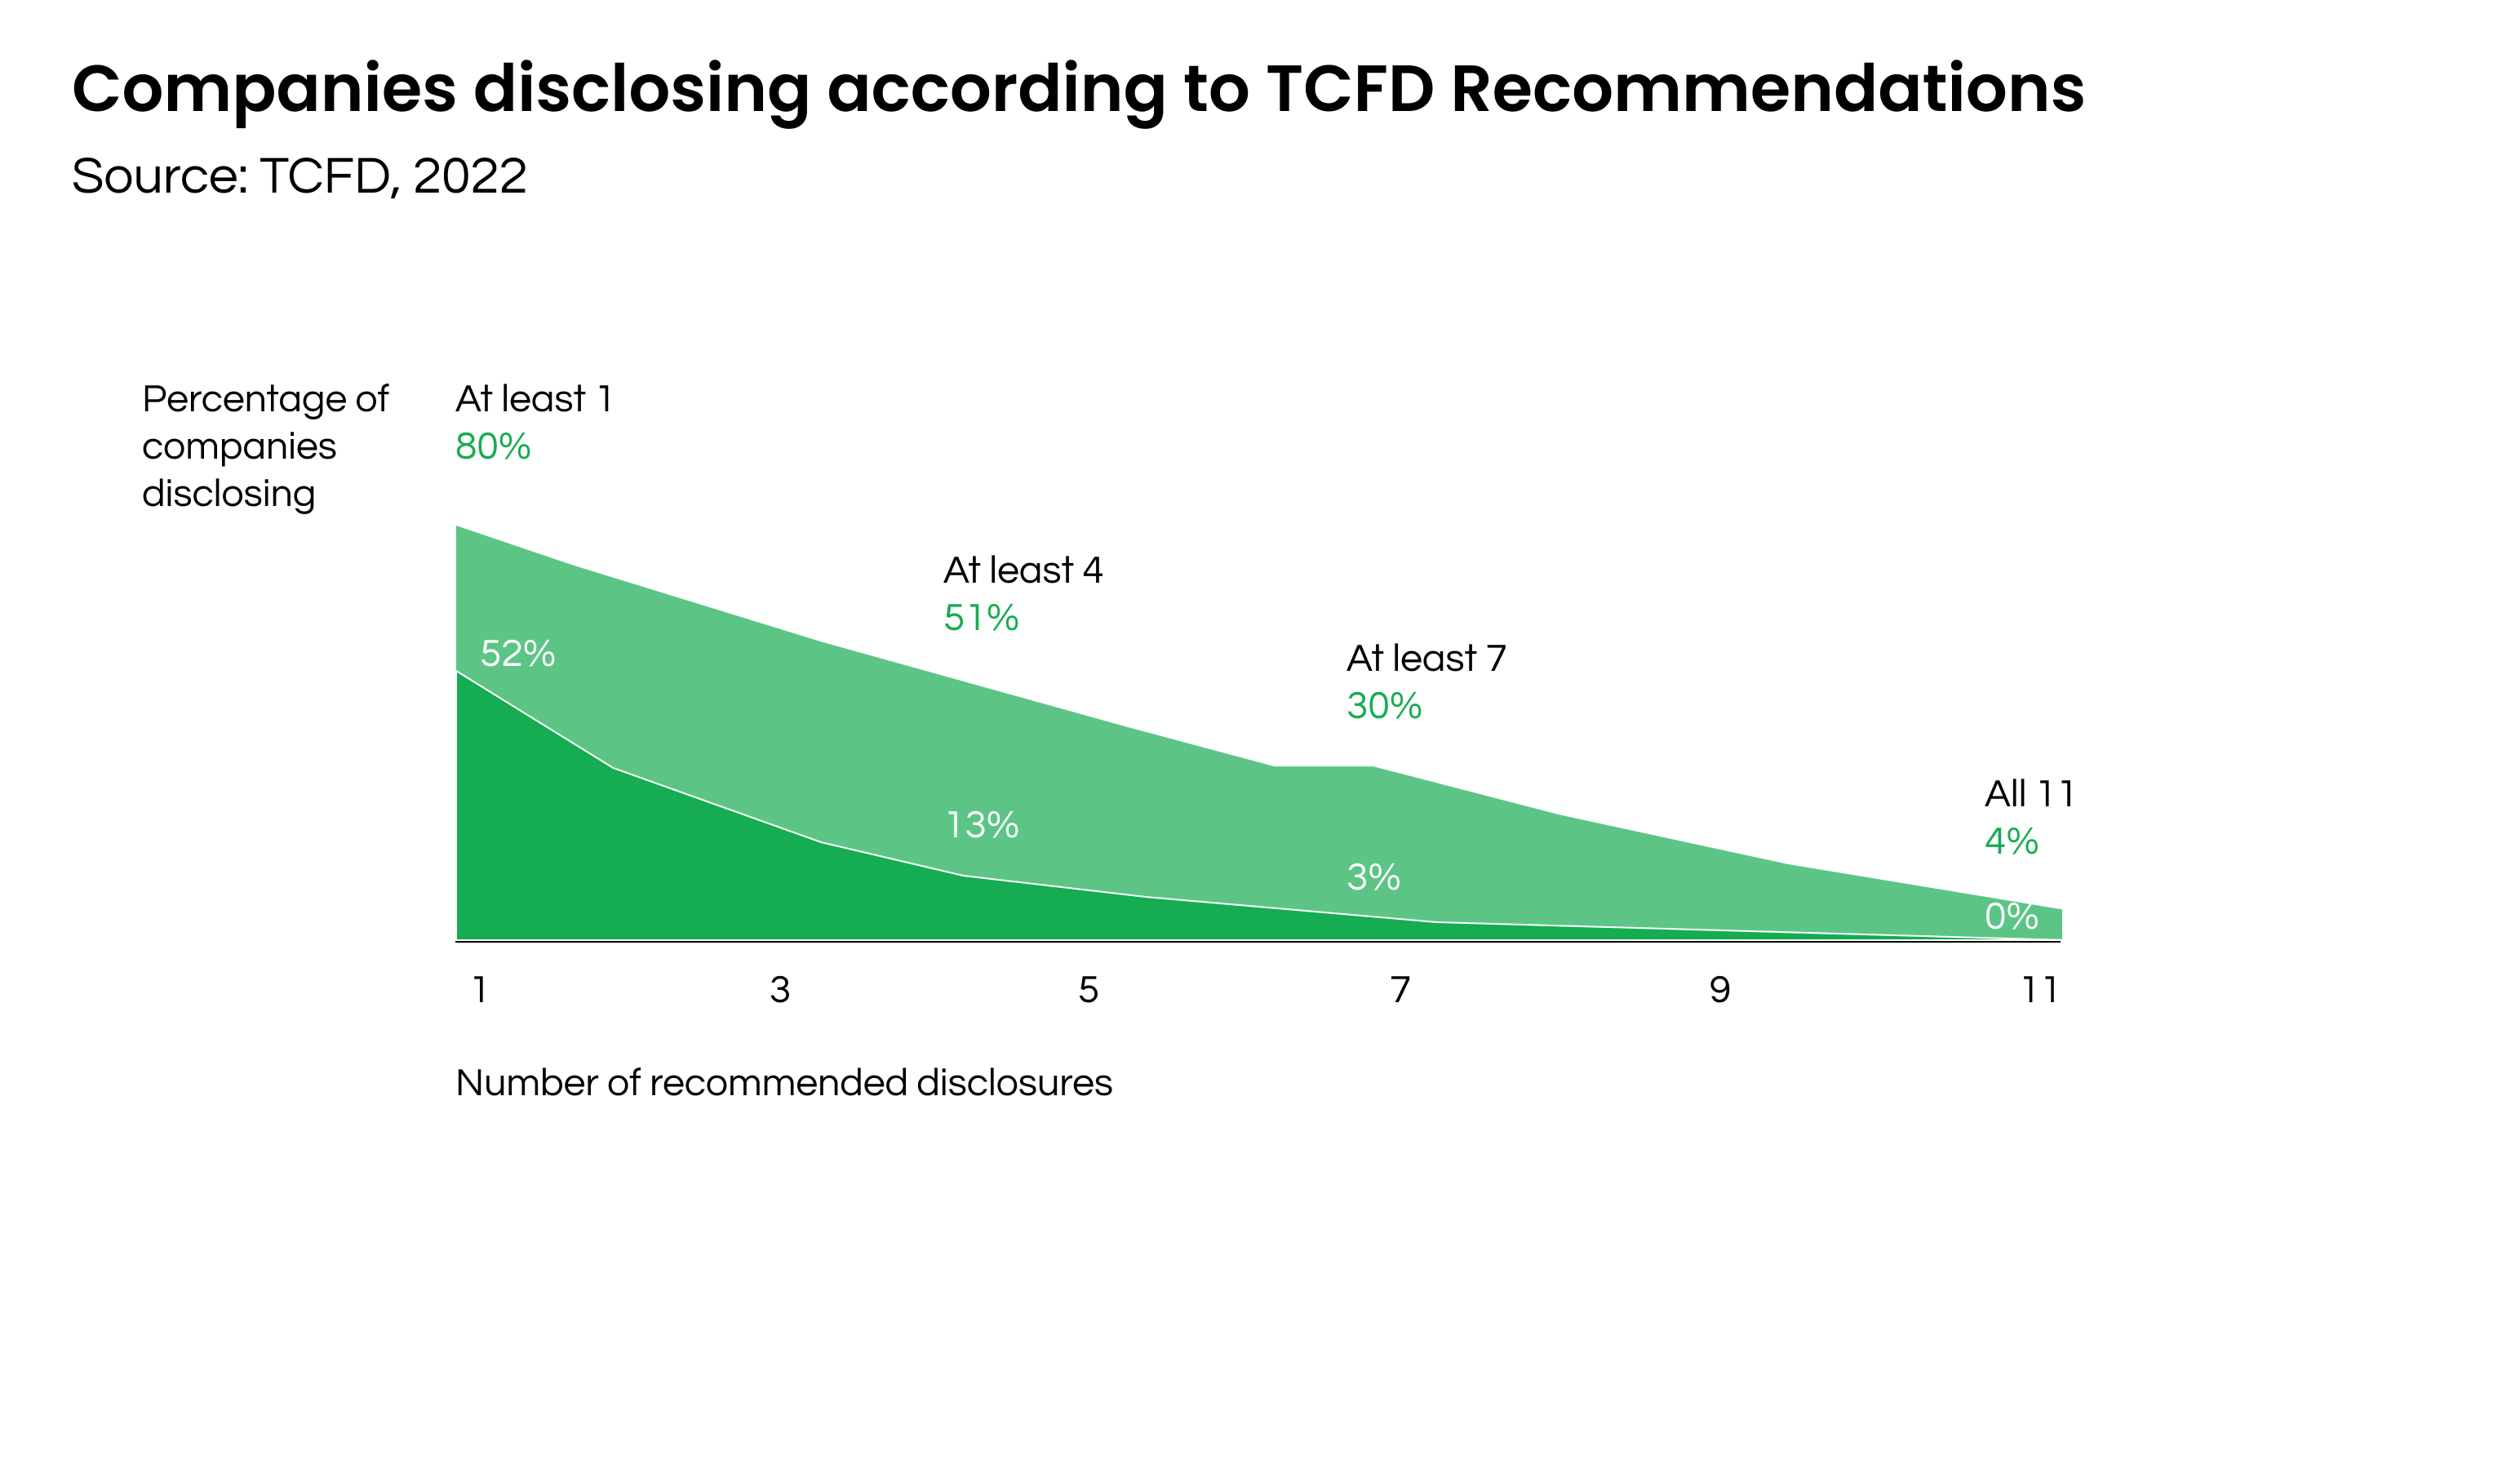 Figure 3. Companies disclosing according to the TCFD